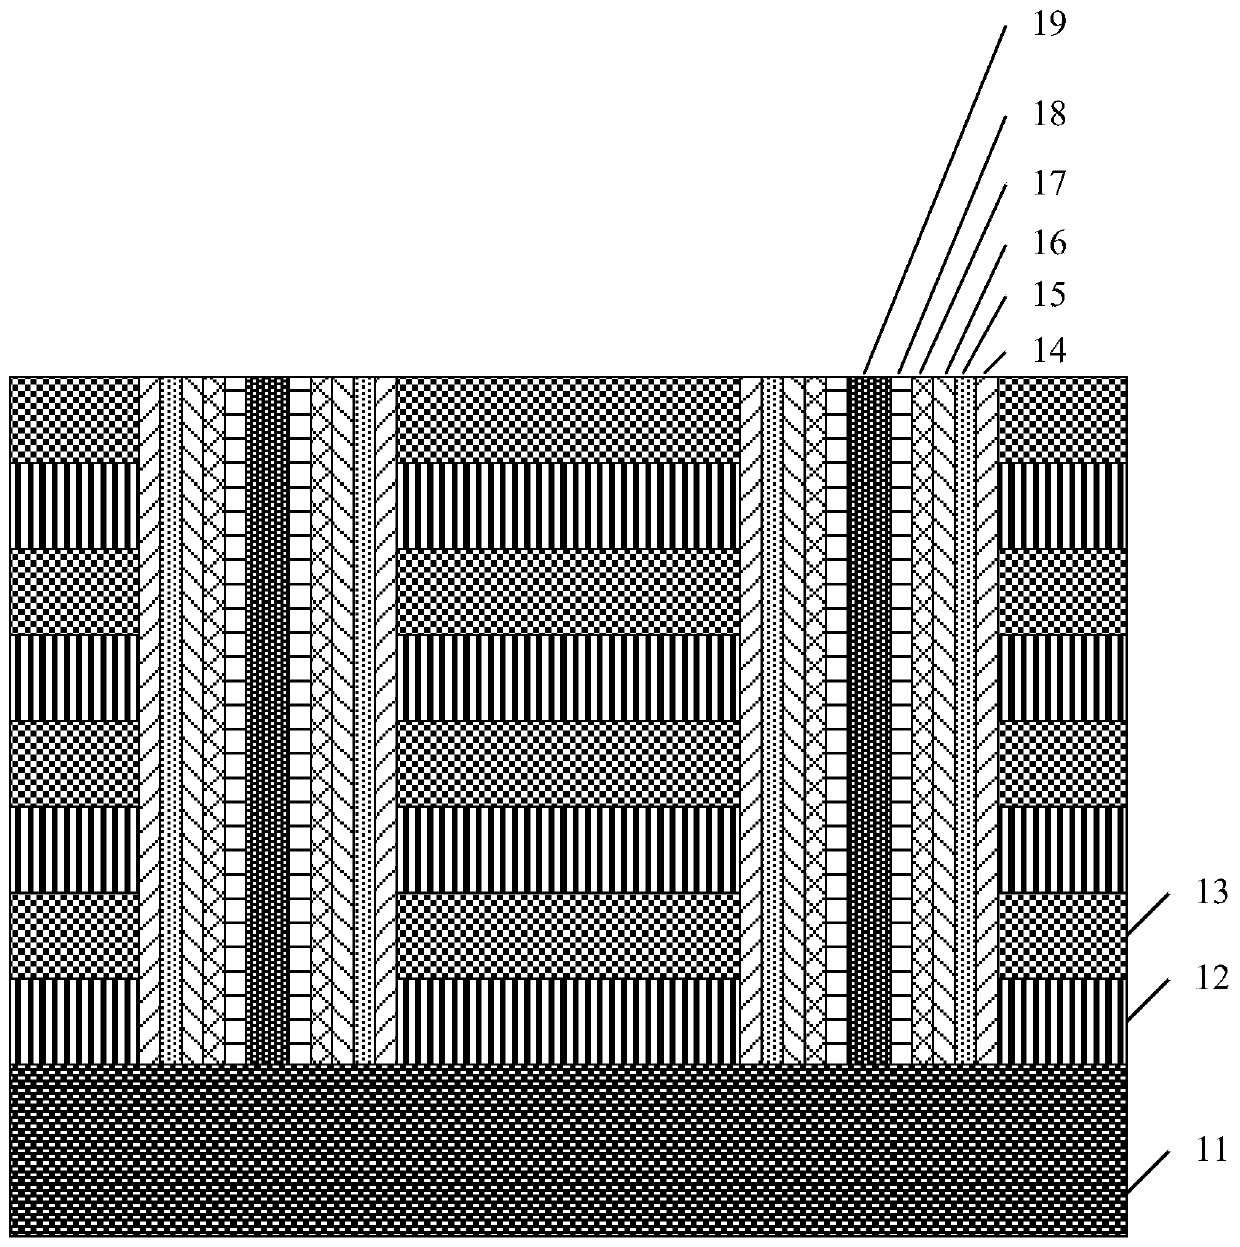 Three-dimensional NAND type ferroelectric memory, manufacturing method and operation method